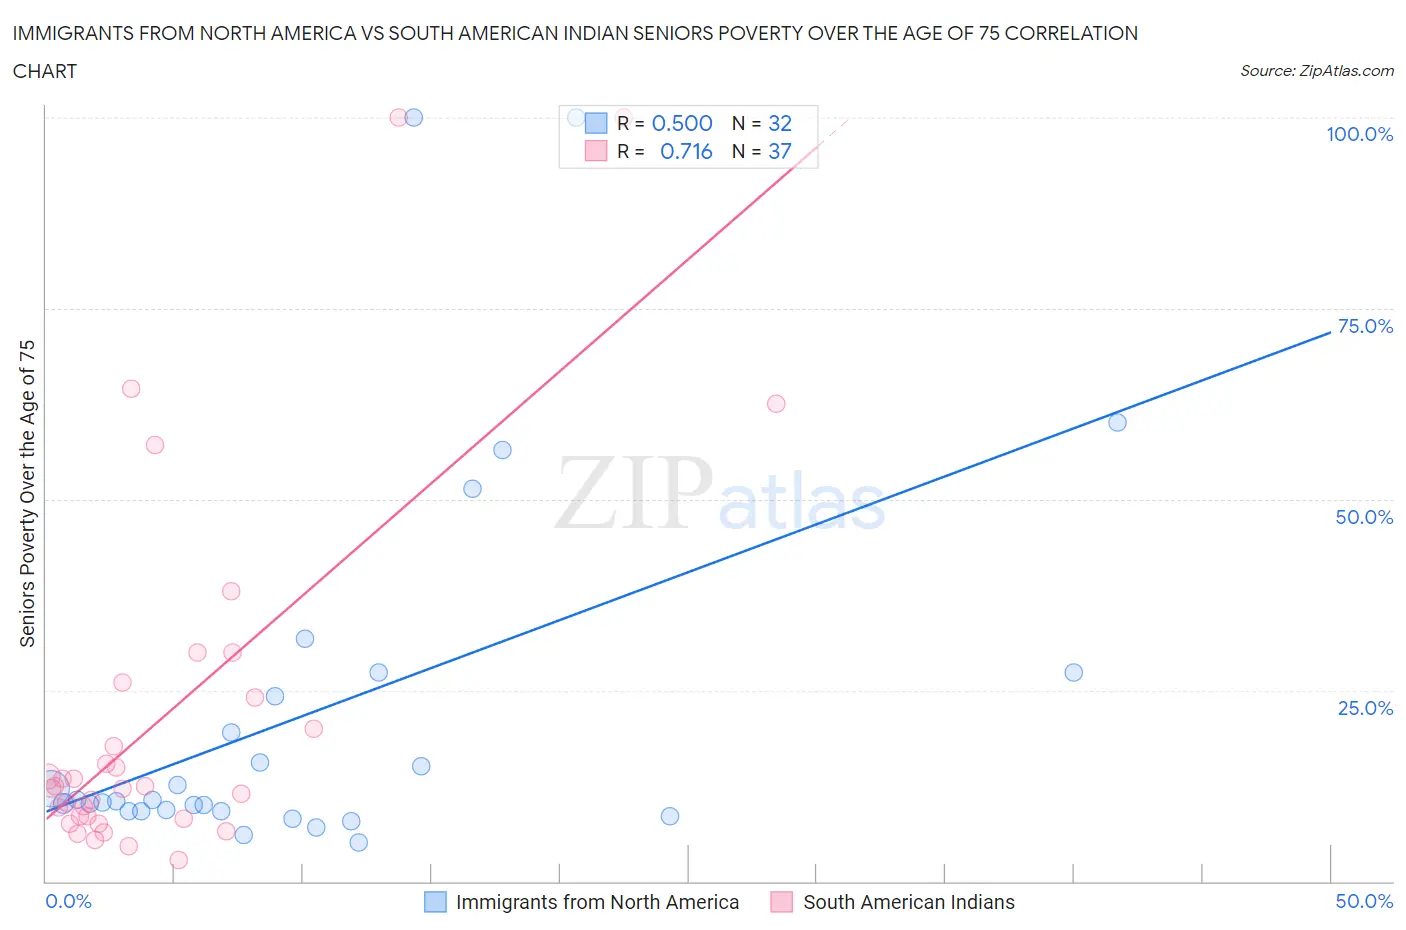 Immigrants from North America vs South American Indian Seniors Poverty Over the Age of 75